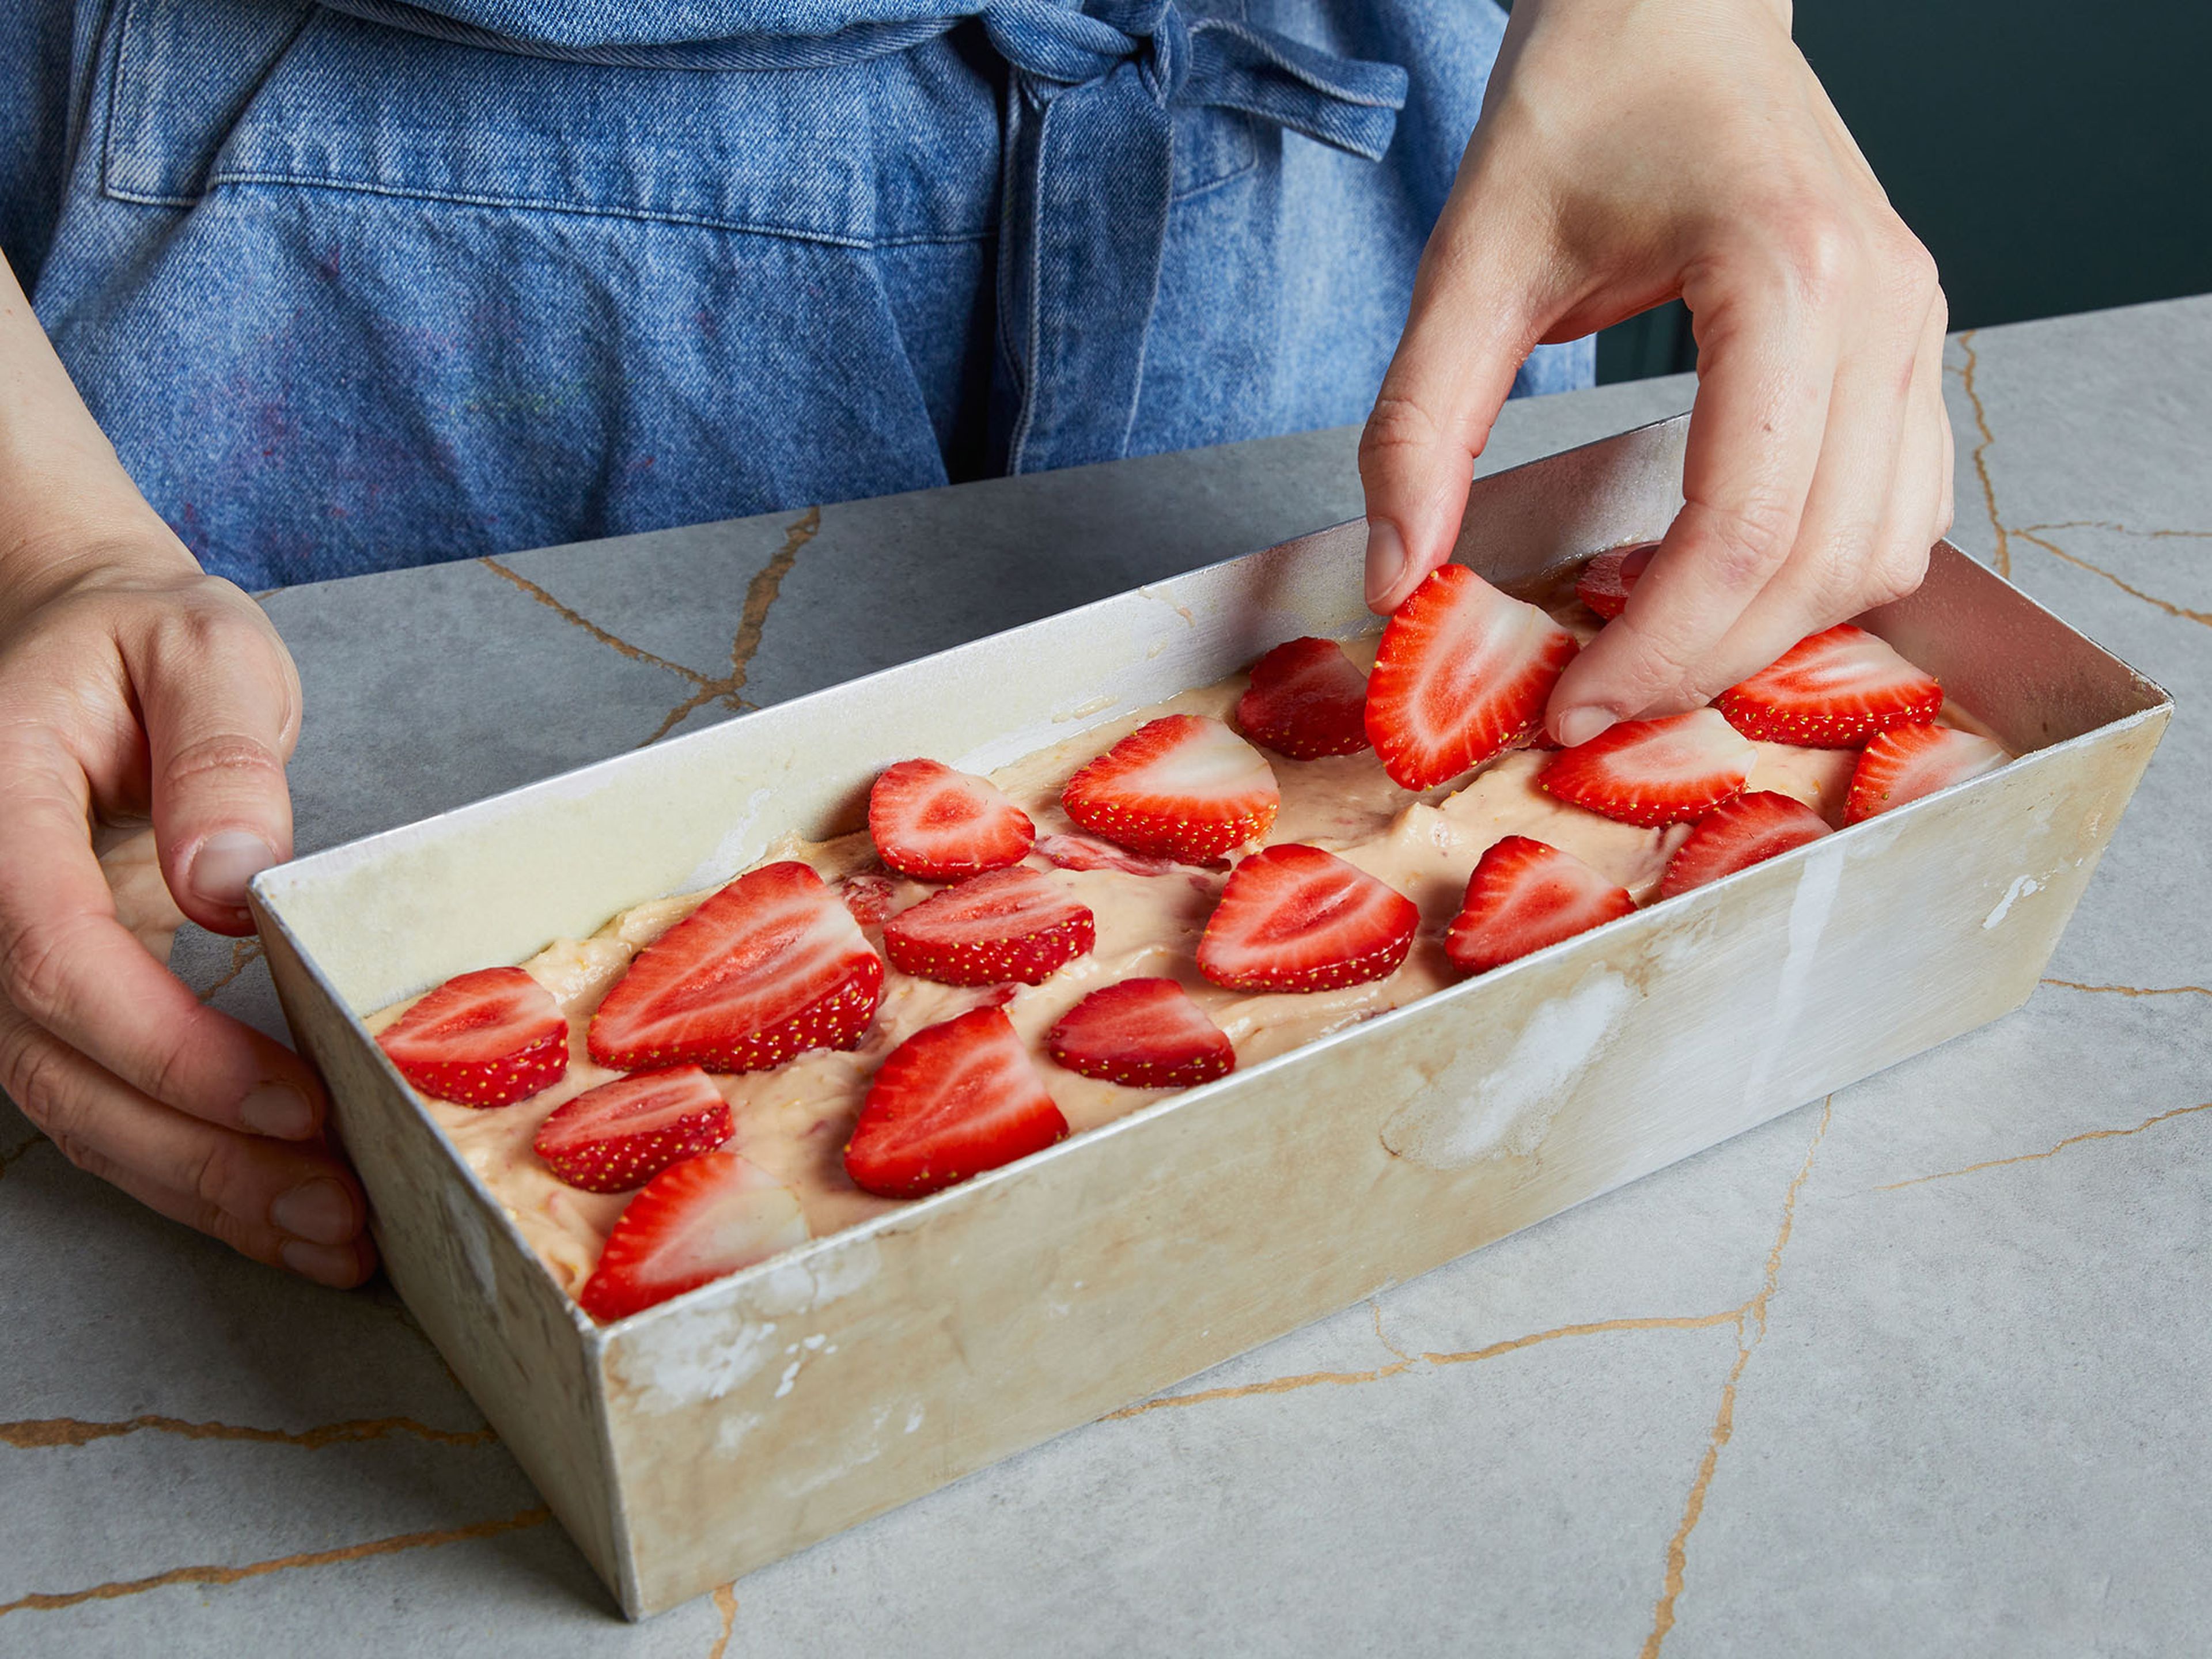 Pour the batter into the prepared loaf pan and spread the remaining strawberries on the cake. Sprinkle a little more cane sugar on top, transfer to the oven and bake for approx. 65–75 min. or until a wooden skewer comes out clean when poking through. Let it cool off before removing from the loaf pan and before serving. Serve with some whipped cream or more yogurt if desired.